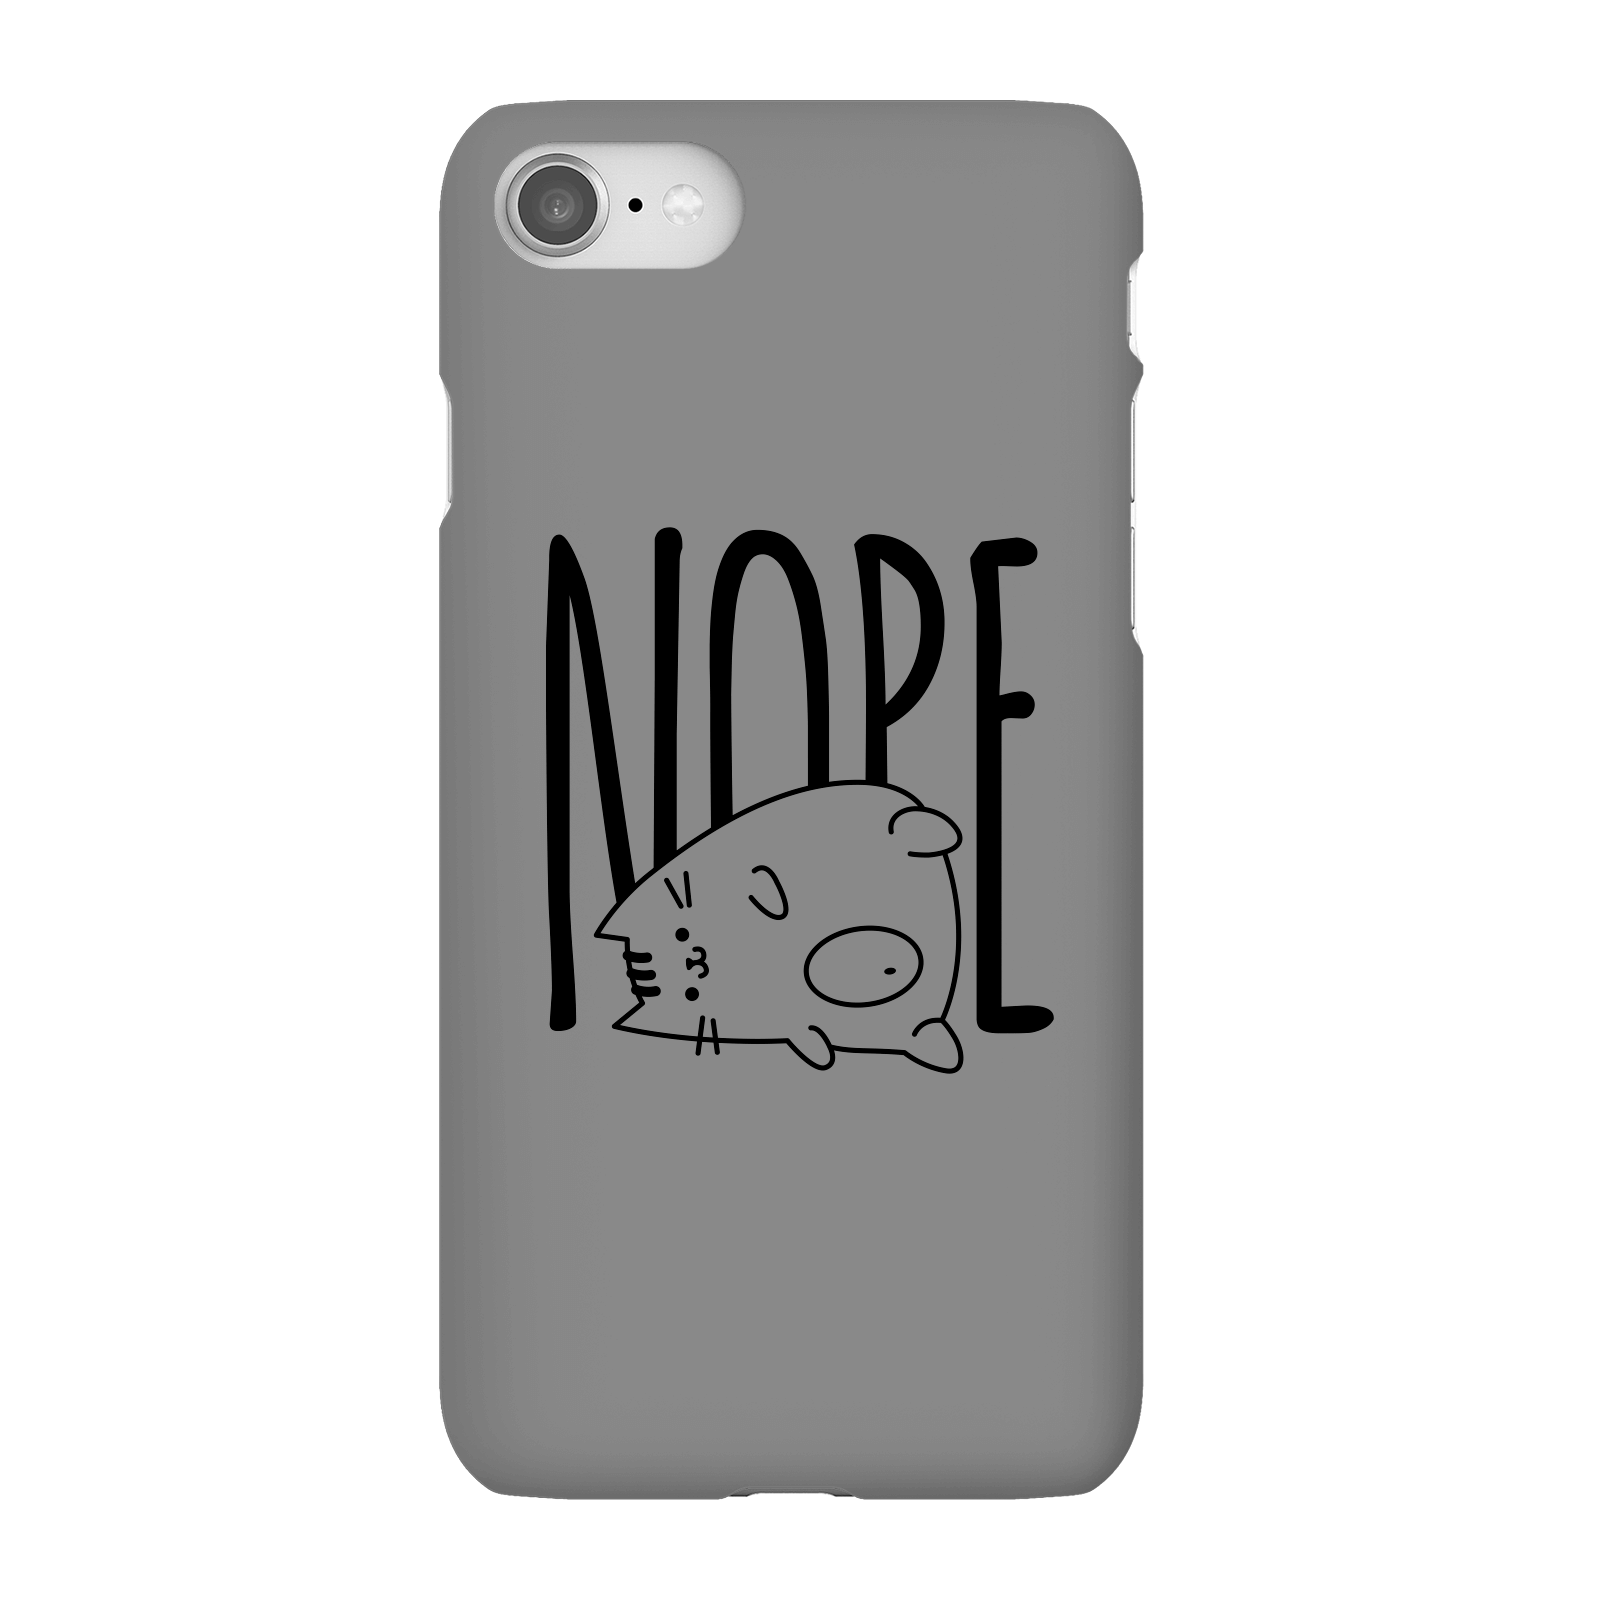 Nope Phone Case for iPhone and Android - iPhone 8 - Snap Case - Gloss